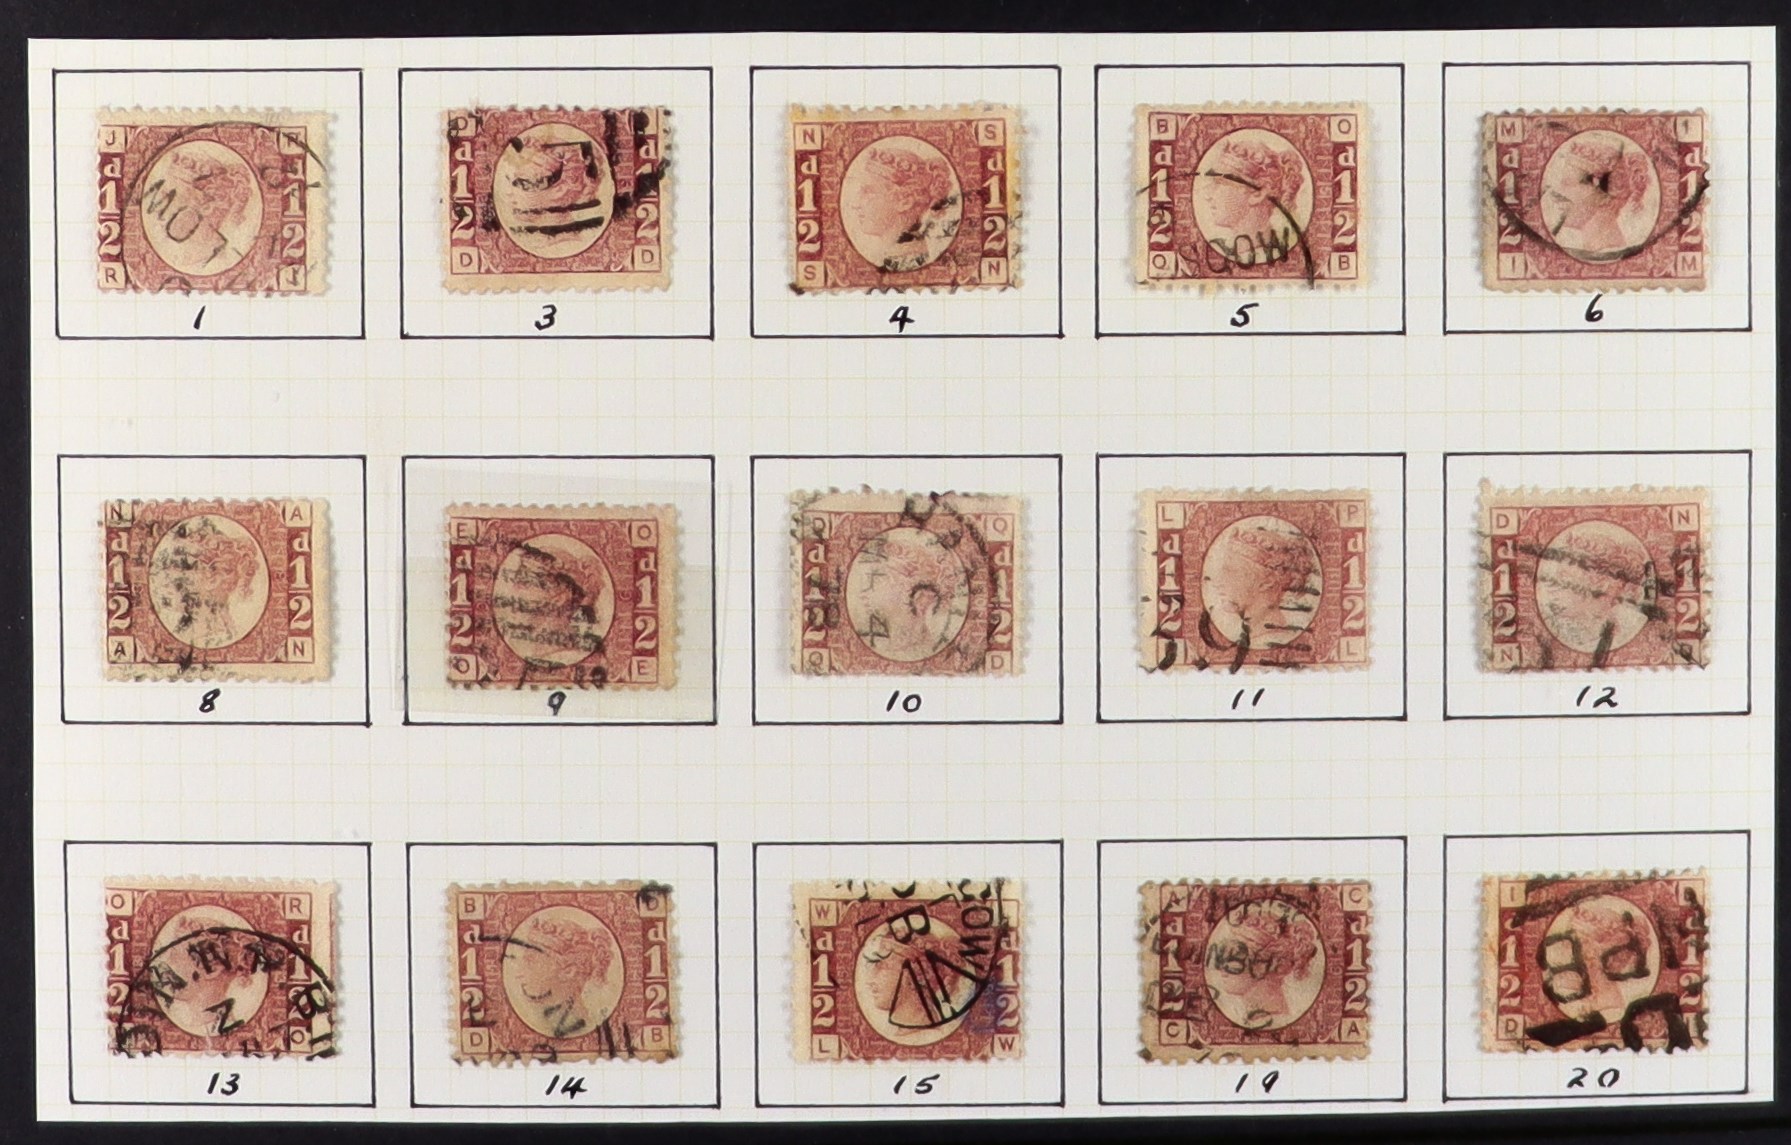 GB.QUEEN VICTORIA 1870 ½d rose complete set of plates 1-20, fine - very fine used, the plate 9